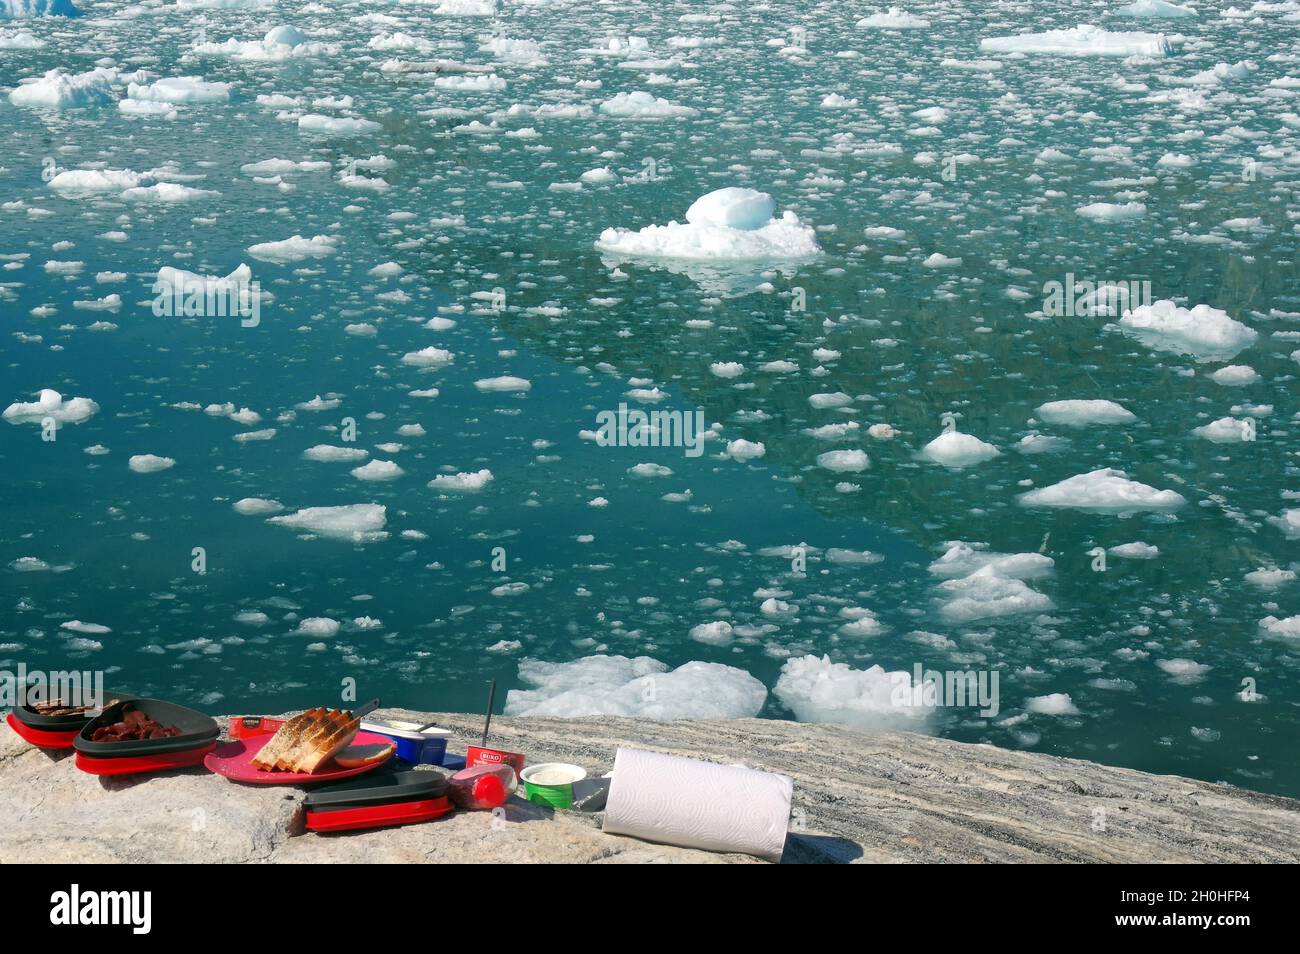 Picnic by the fjord, icebergs and ice pieces, Knud Rasmussen Glacier, Tasilaq, East Greenland, denmark, Greenland Stock Photo